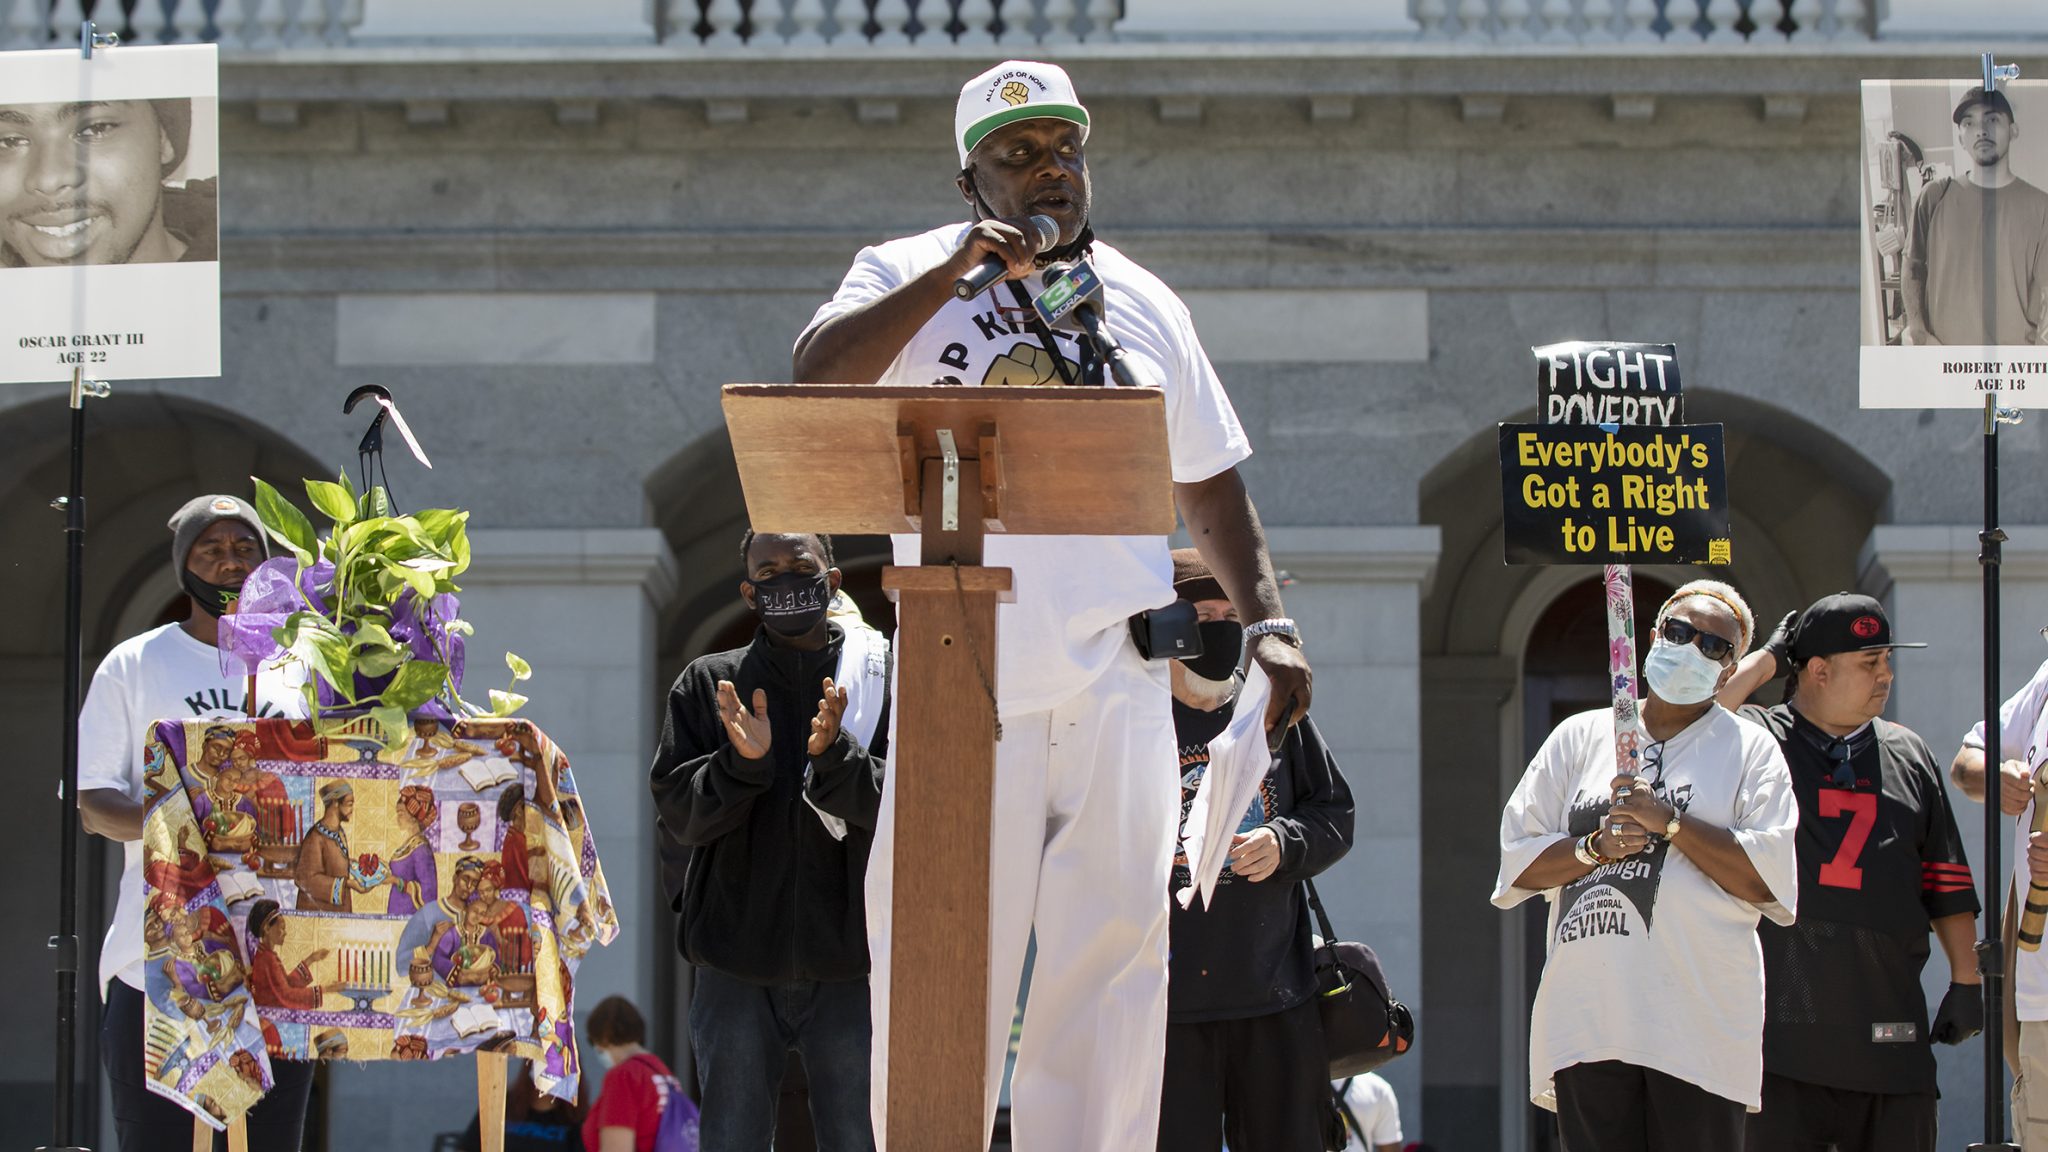 Dorsey Nunn, founding member of All of Us or None and executive director of Legal Services for Prisoners with Children, speaks to people gathered at the “Stop Killing Us” event organized by All of Us or None of Us and other collaborators at the California State Capitol in Sacramento, California, Wednesday, July 1, 2020. (Sara Nevis/snevis.express@gmail.com)